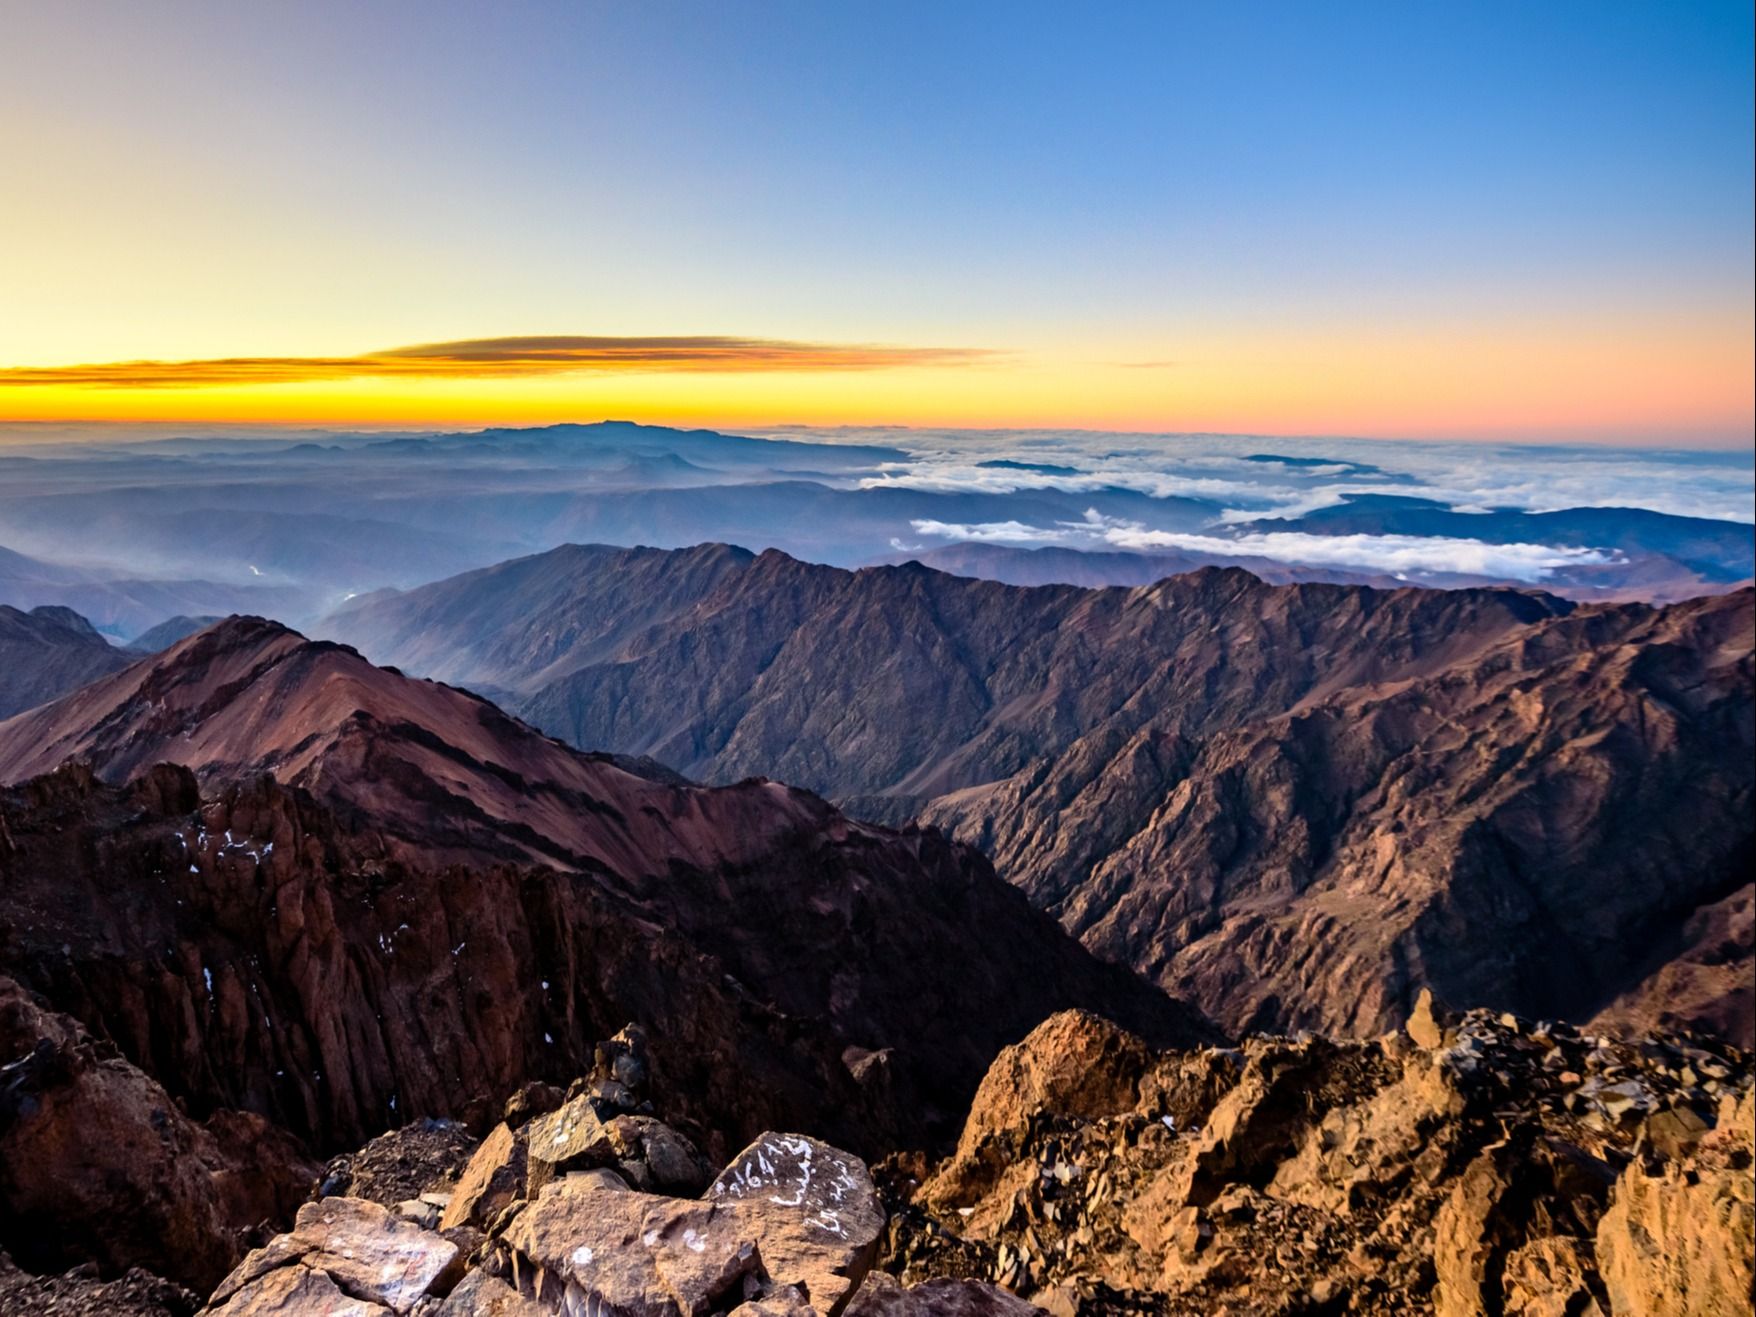 Sunrise views from Mount Toubkal, in Morocco